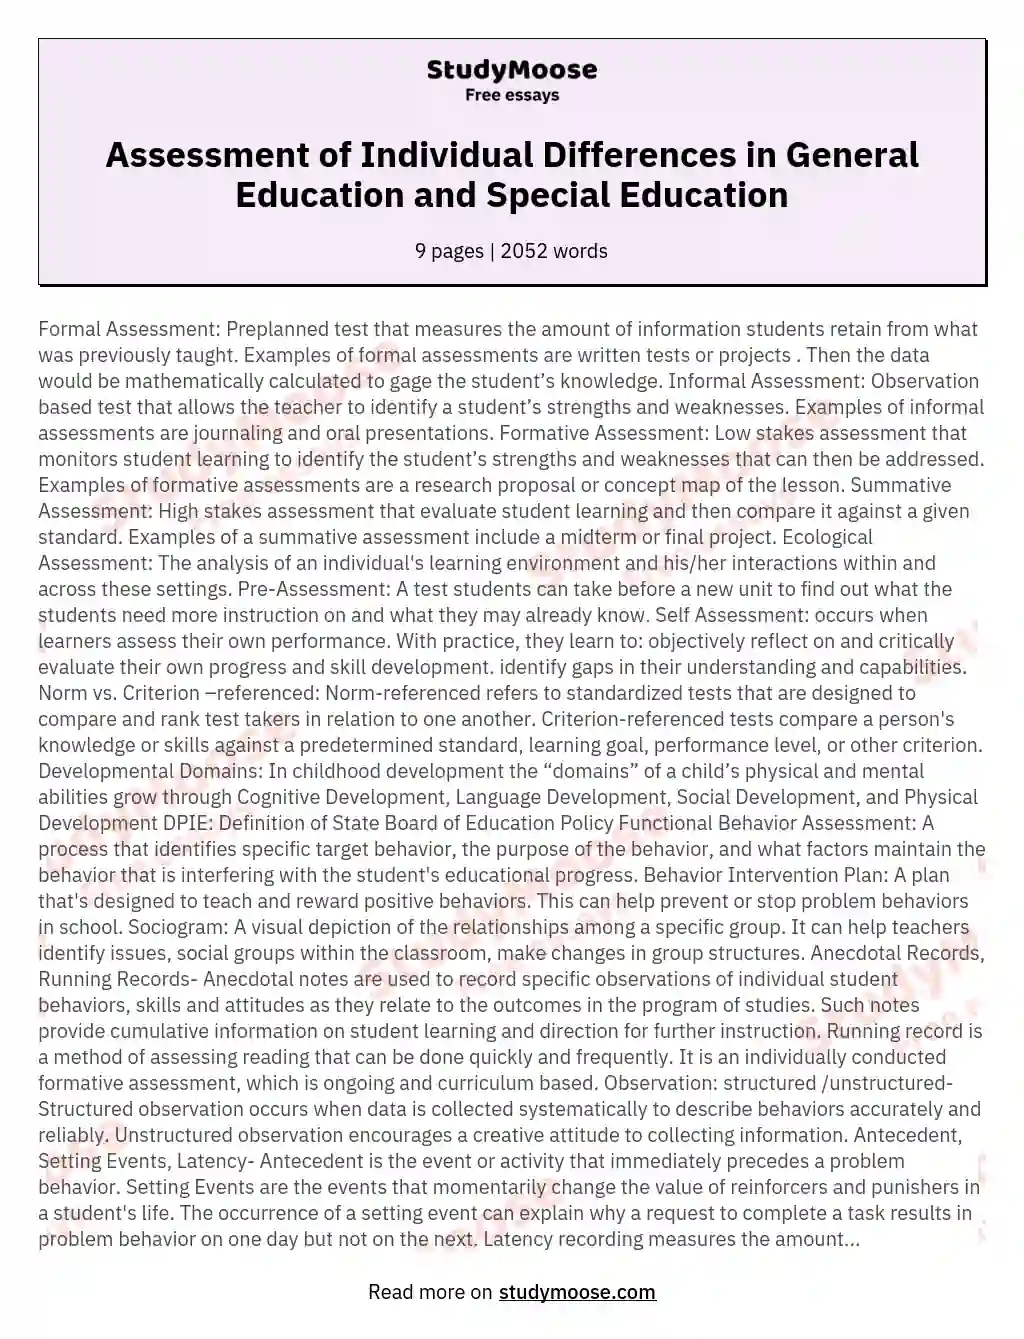 Assessment of Individual Differences in General Education and Special Education